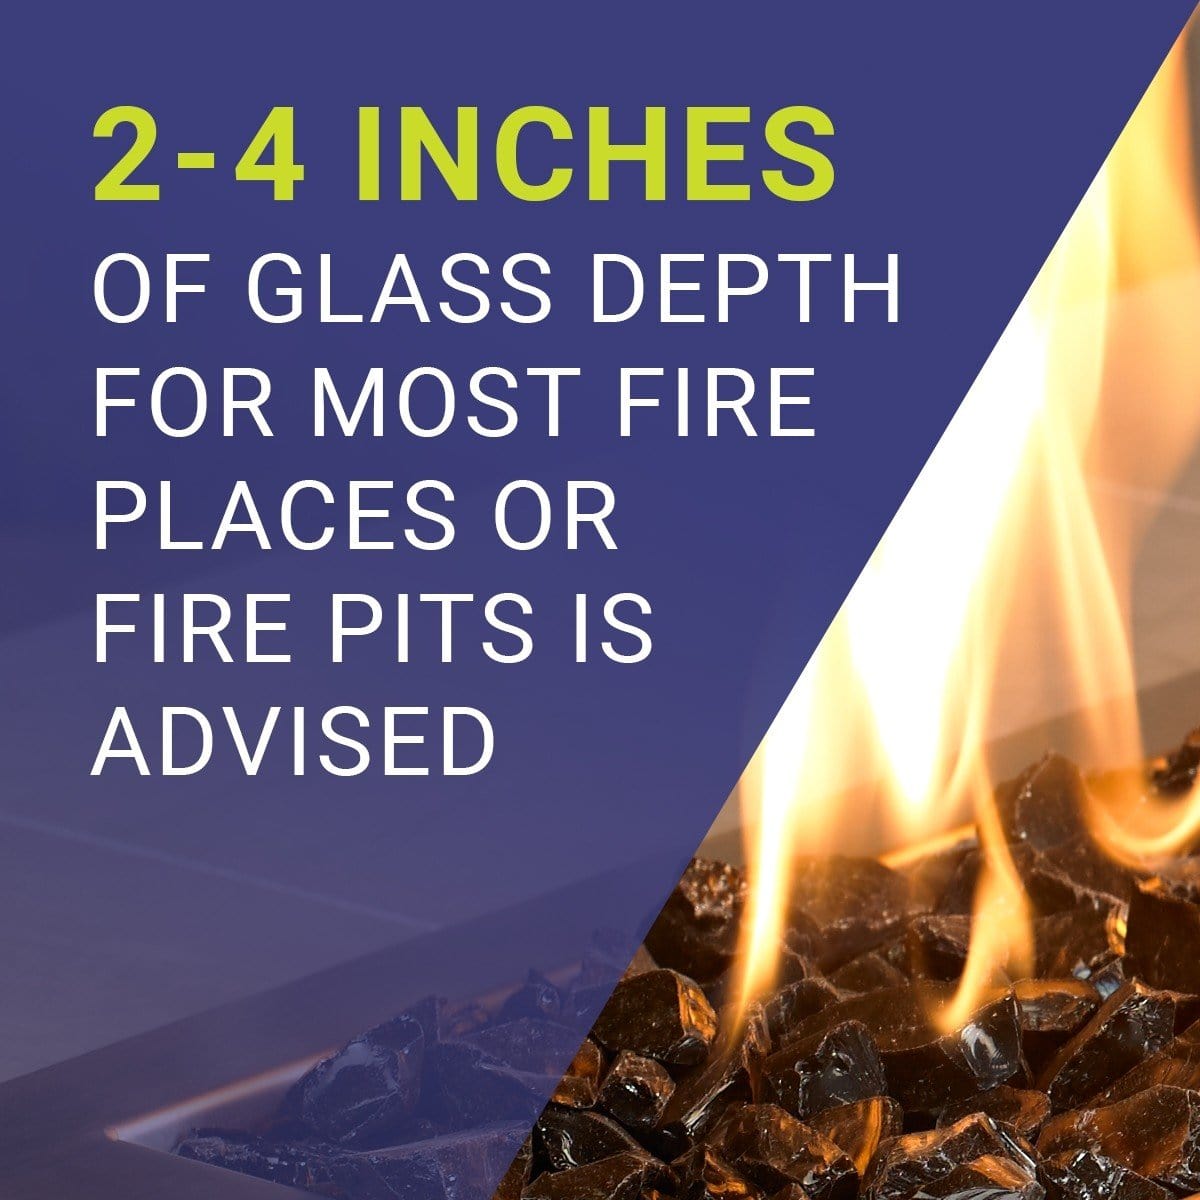 American Fire Glass AFF-GRYRF12-10 1/2-Inch Premium Fire Glass 10-Pounds, Gray Reflective